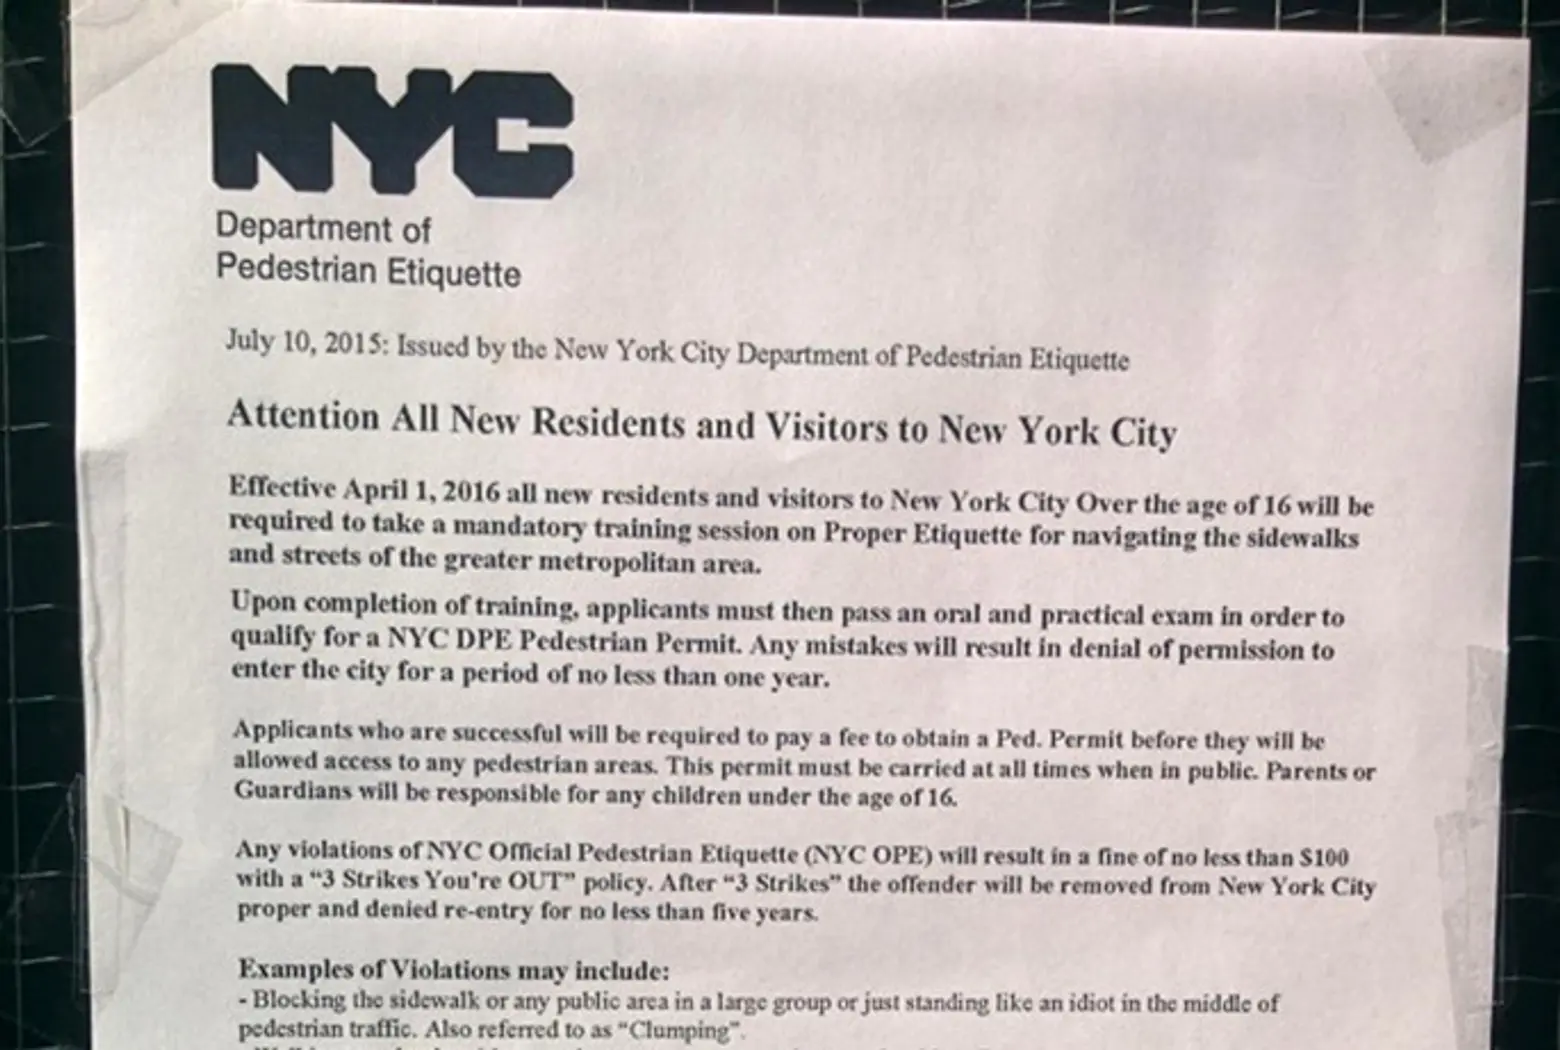 ATTENTION: Walk Faster or You’ll Be Banned from NYC for Five Years